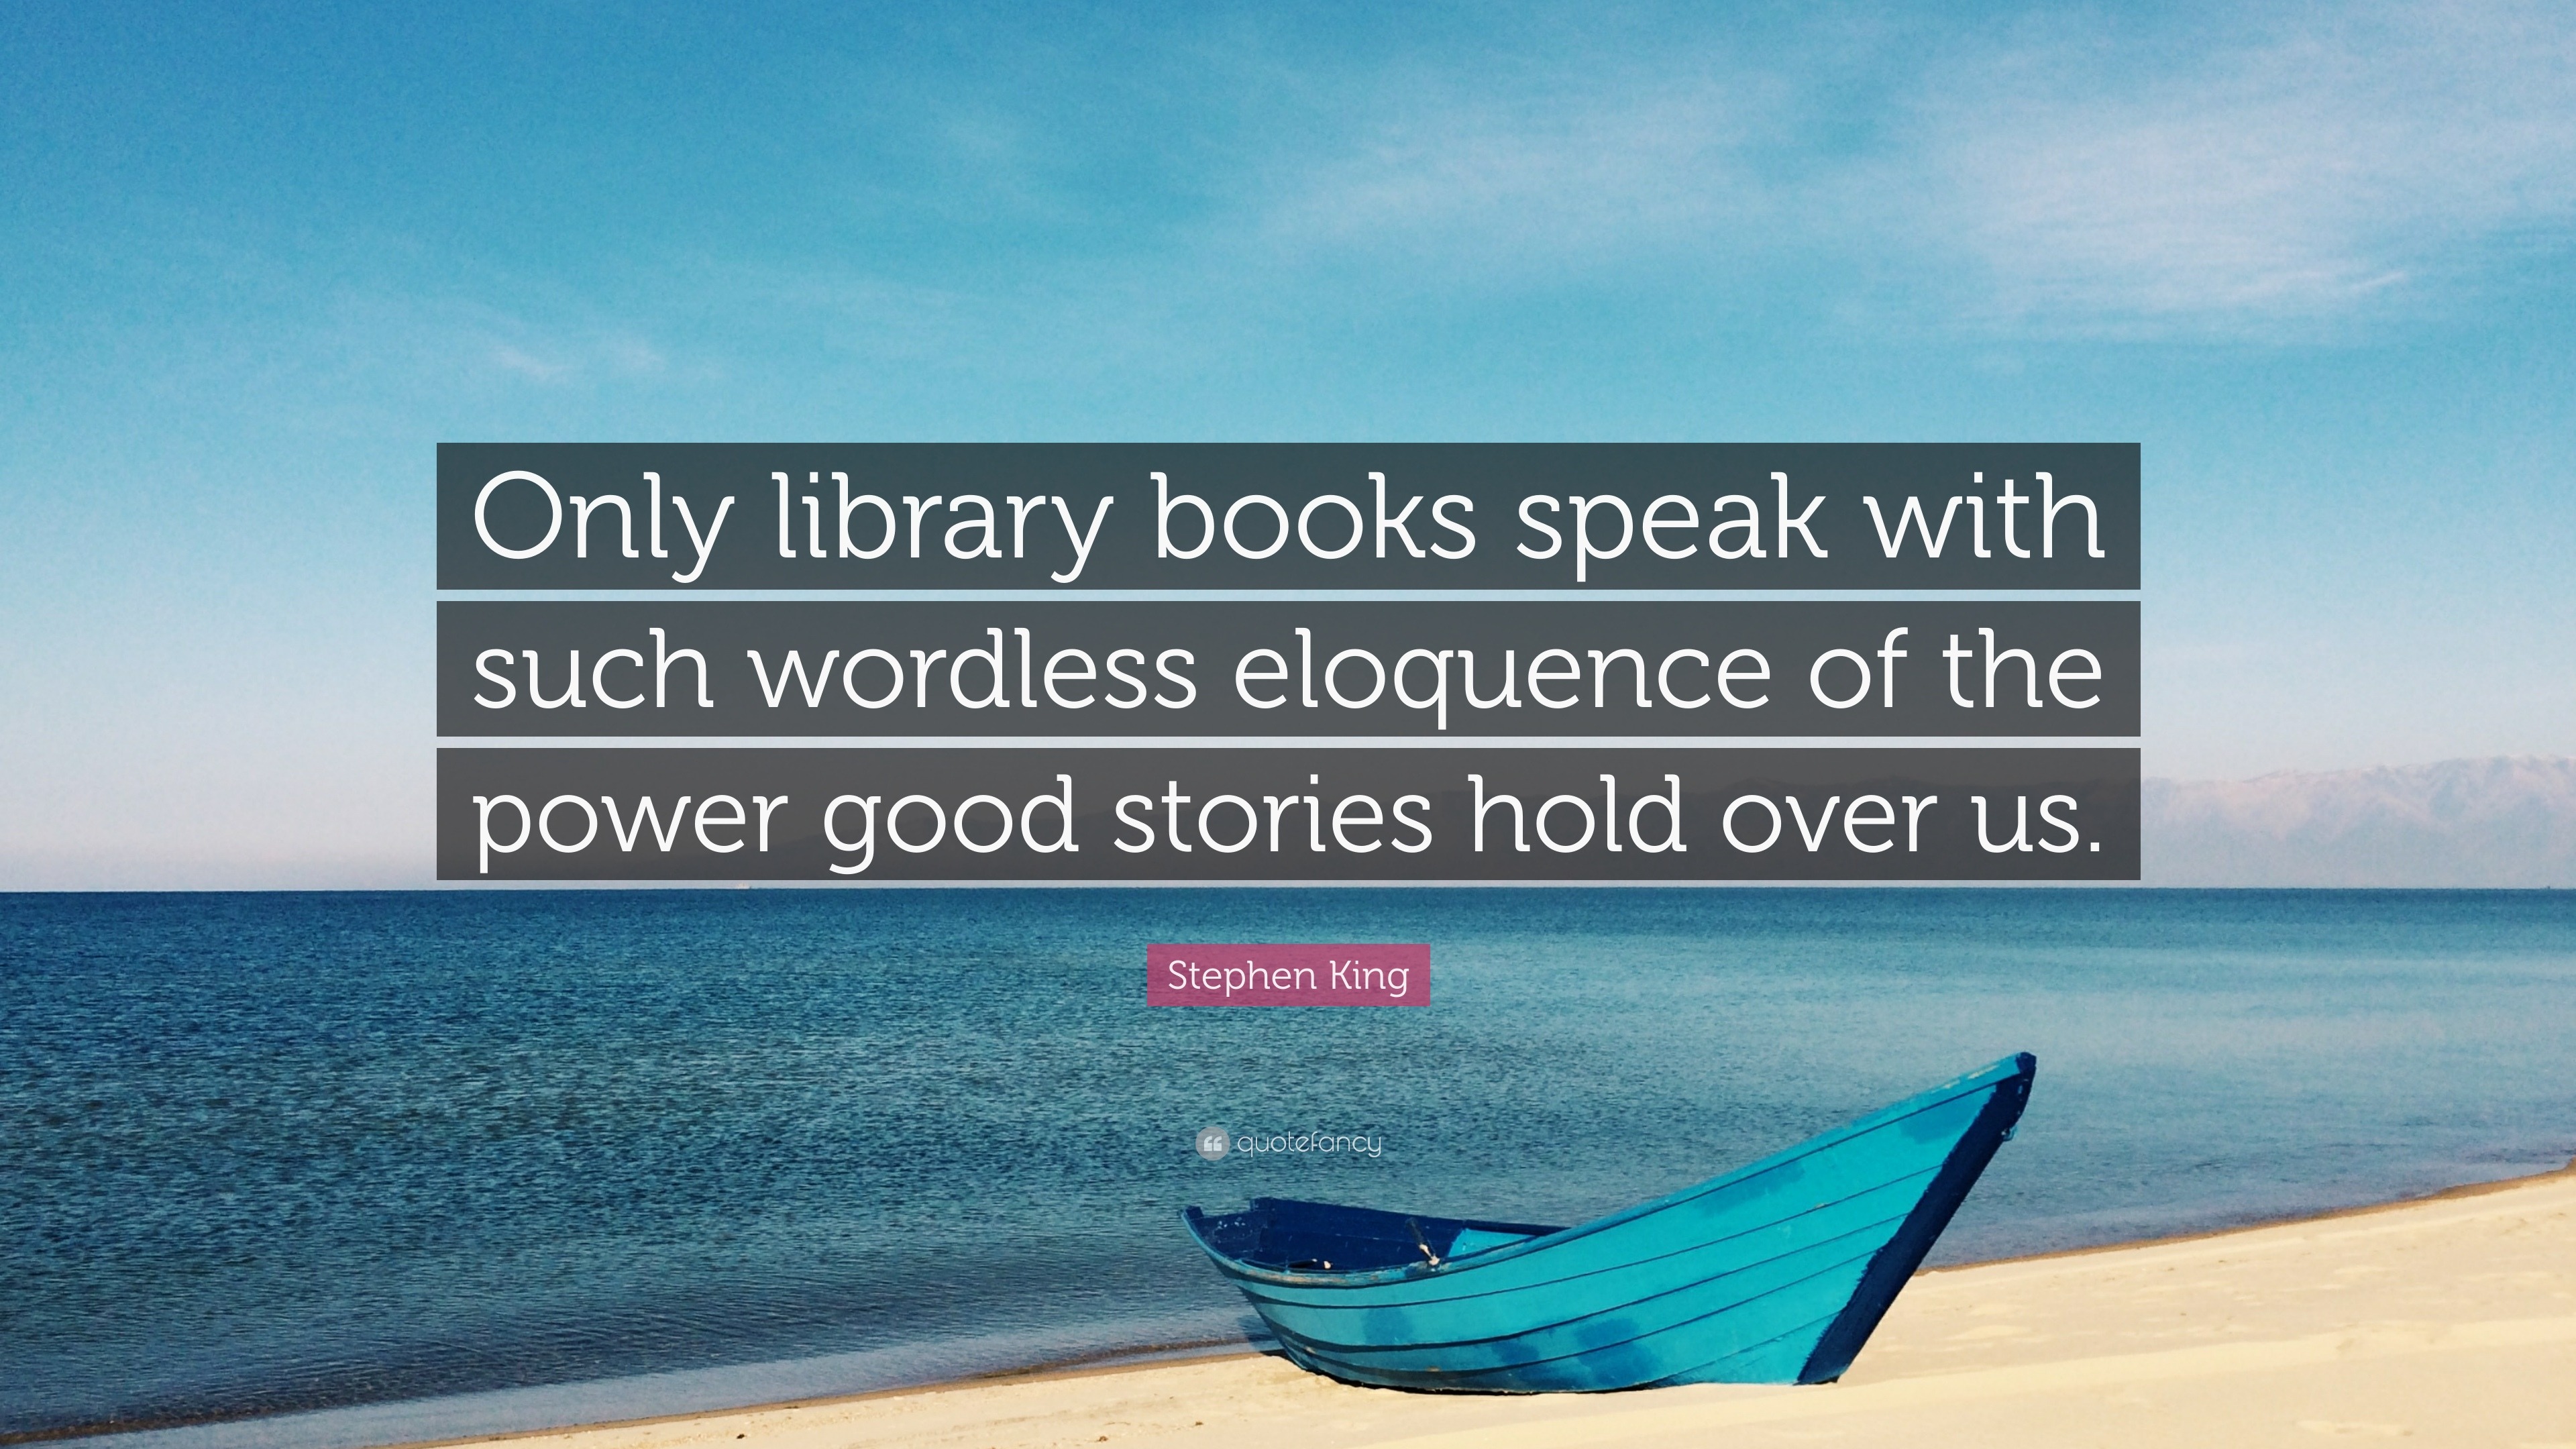 Stephen King Quote: “Only library books speak with such wordless ...